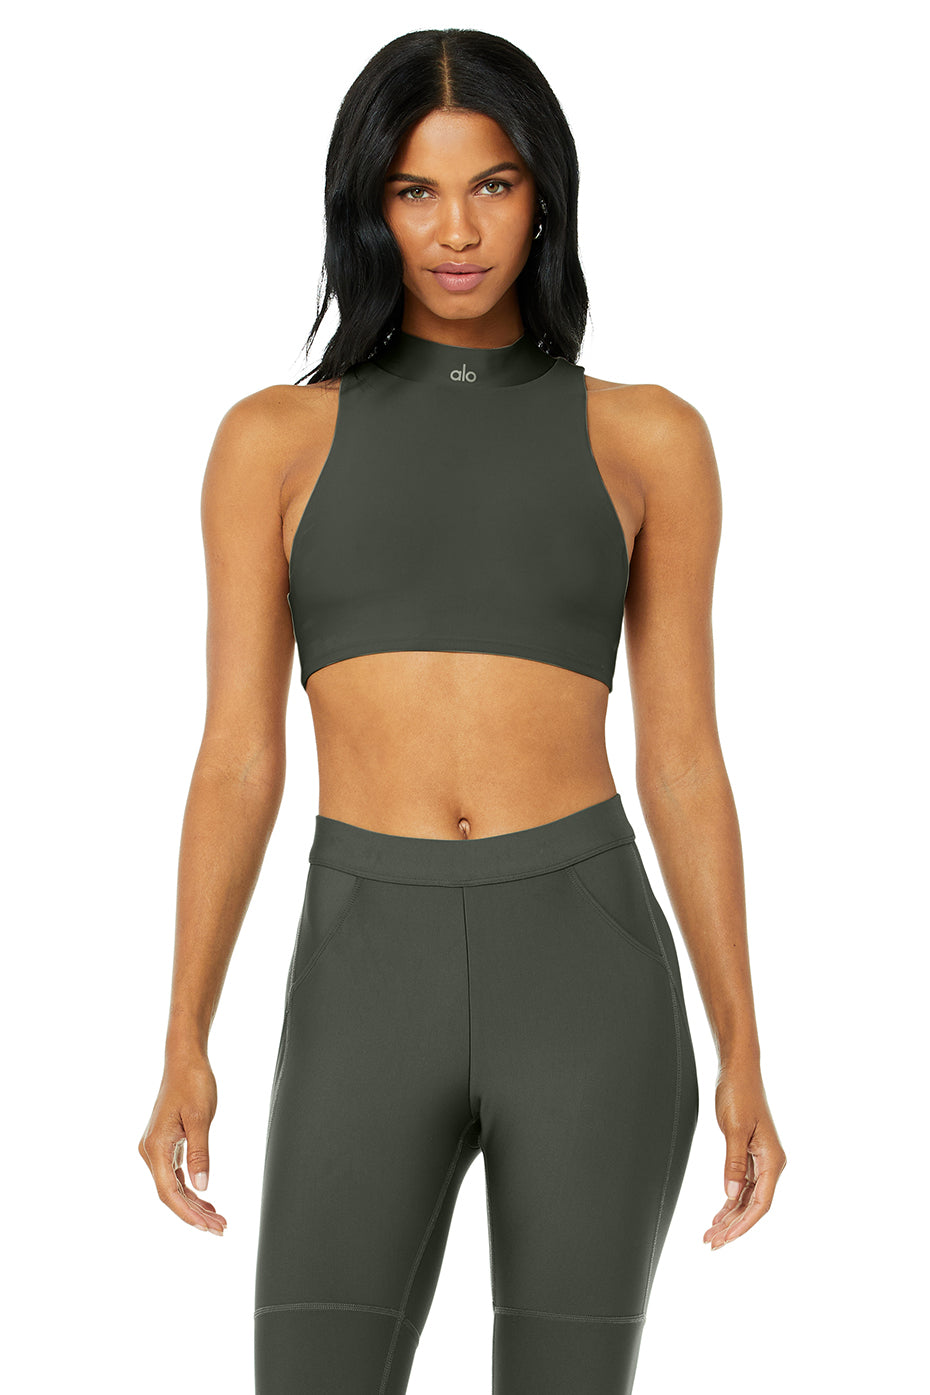 Airlift Fuse Bra Tank Top in Dark Cactus by Alo Yoga